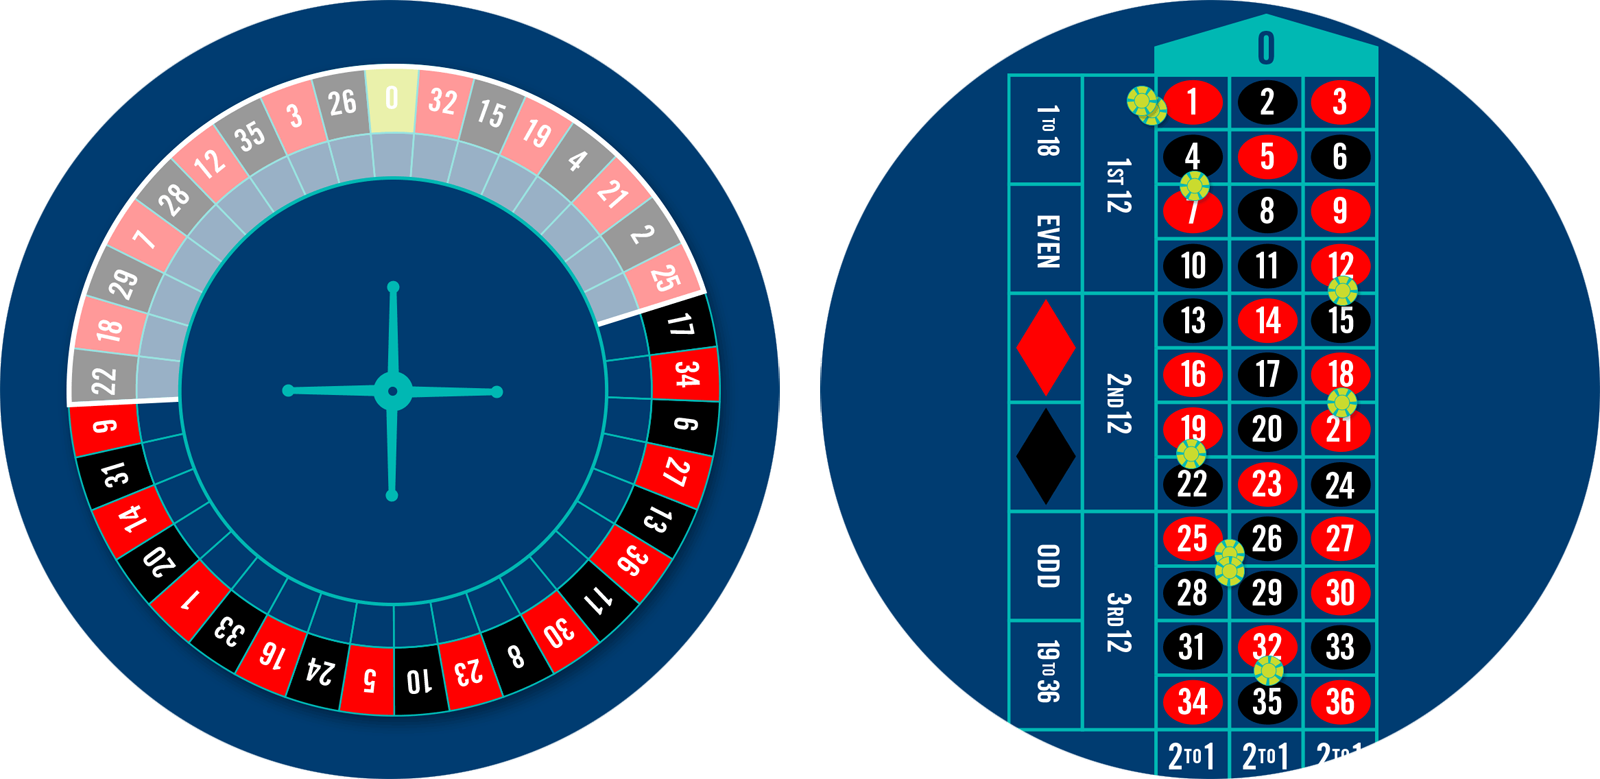 Roulette wheel with voisins du zero bet highlighted, and a roulette table with 9 chips placed for the voisins du zero bet.